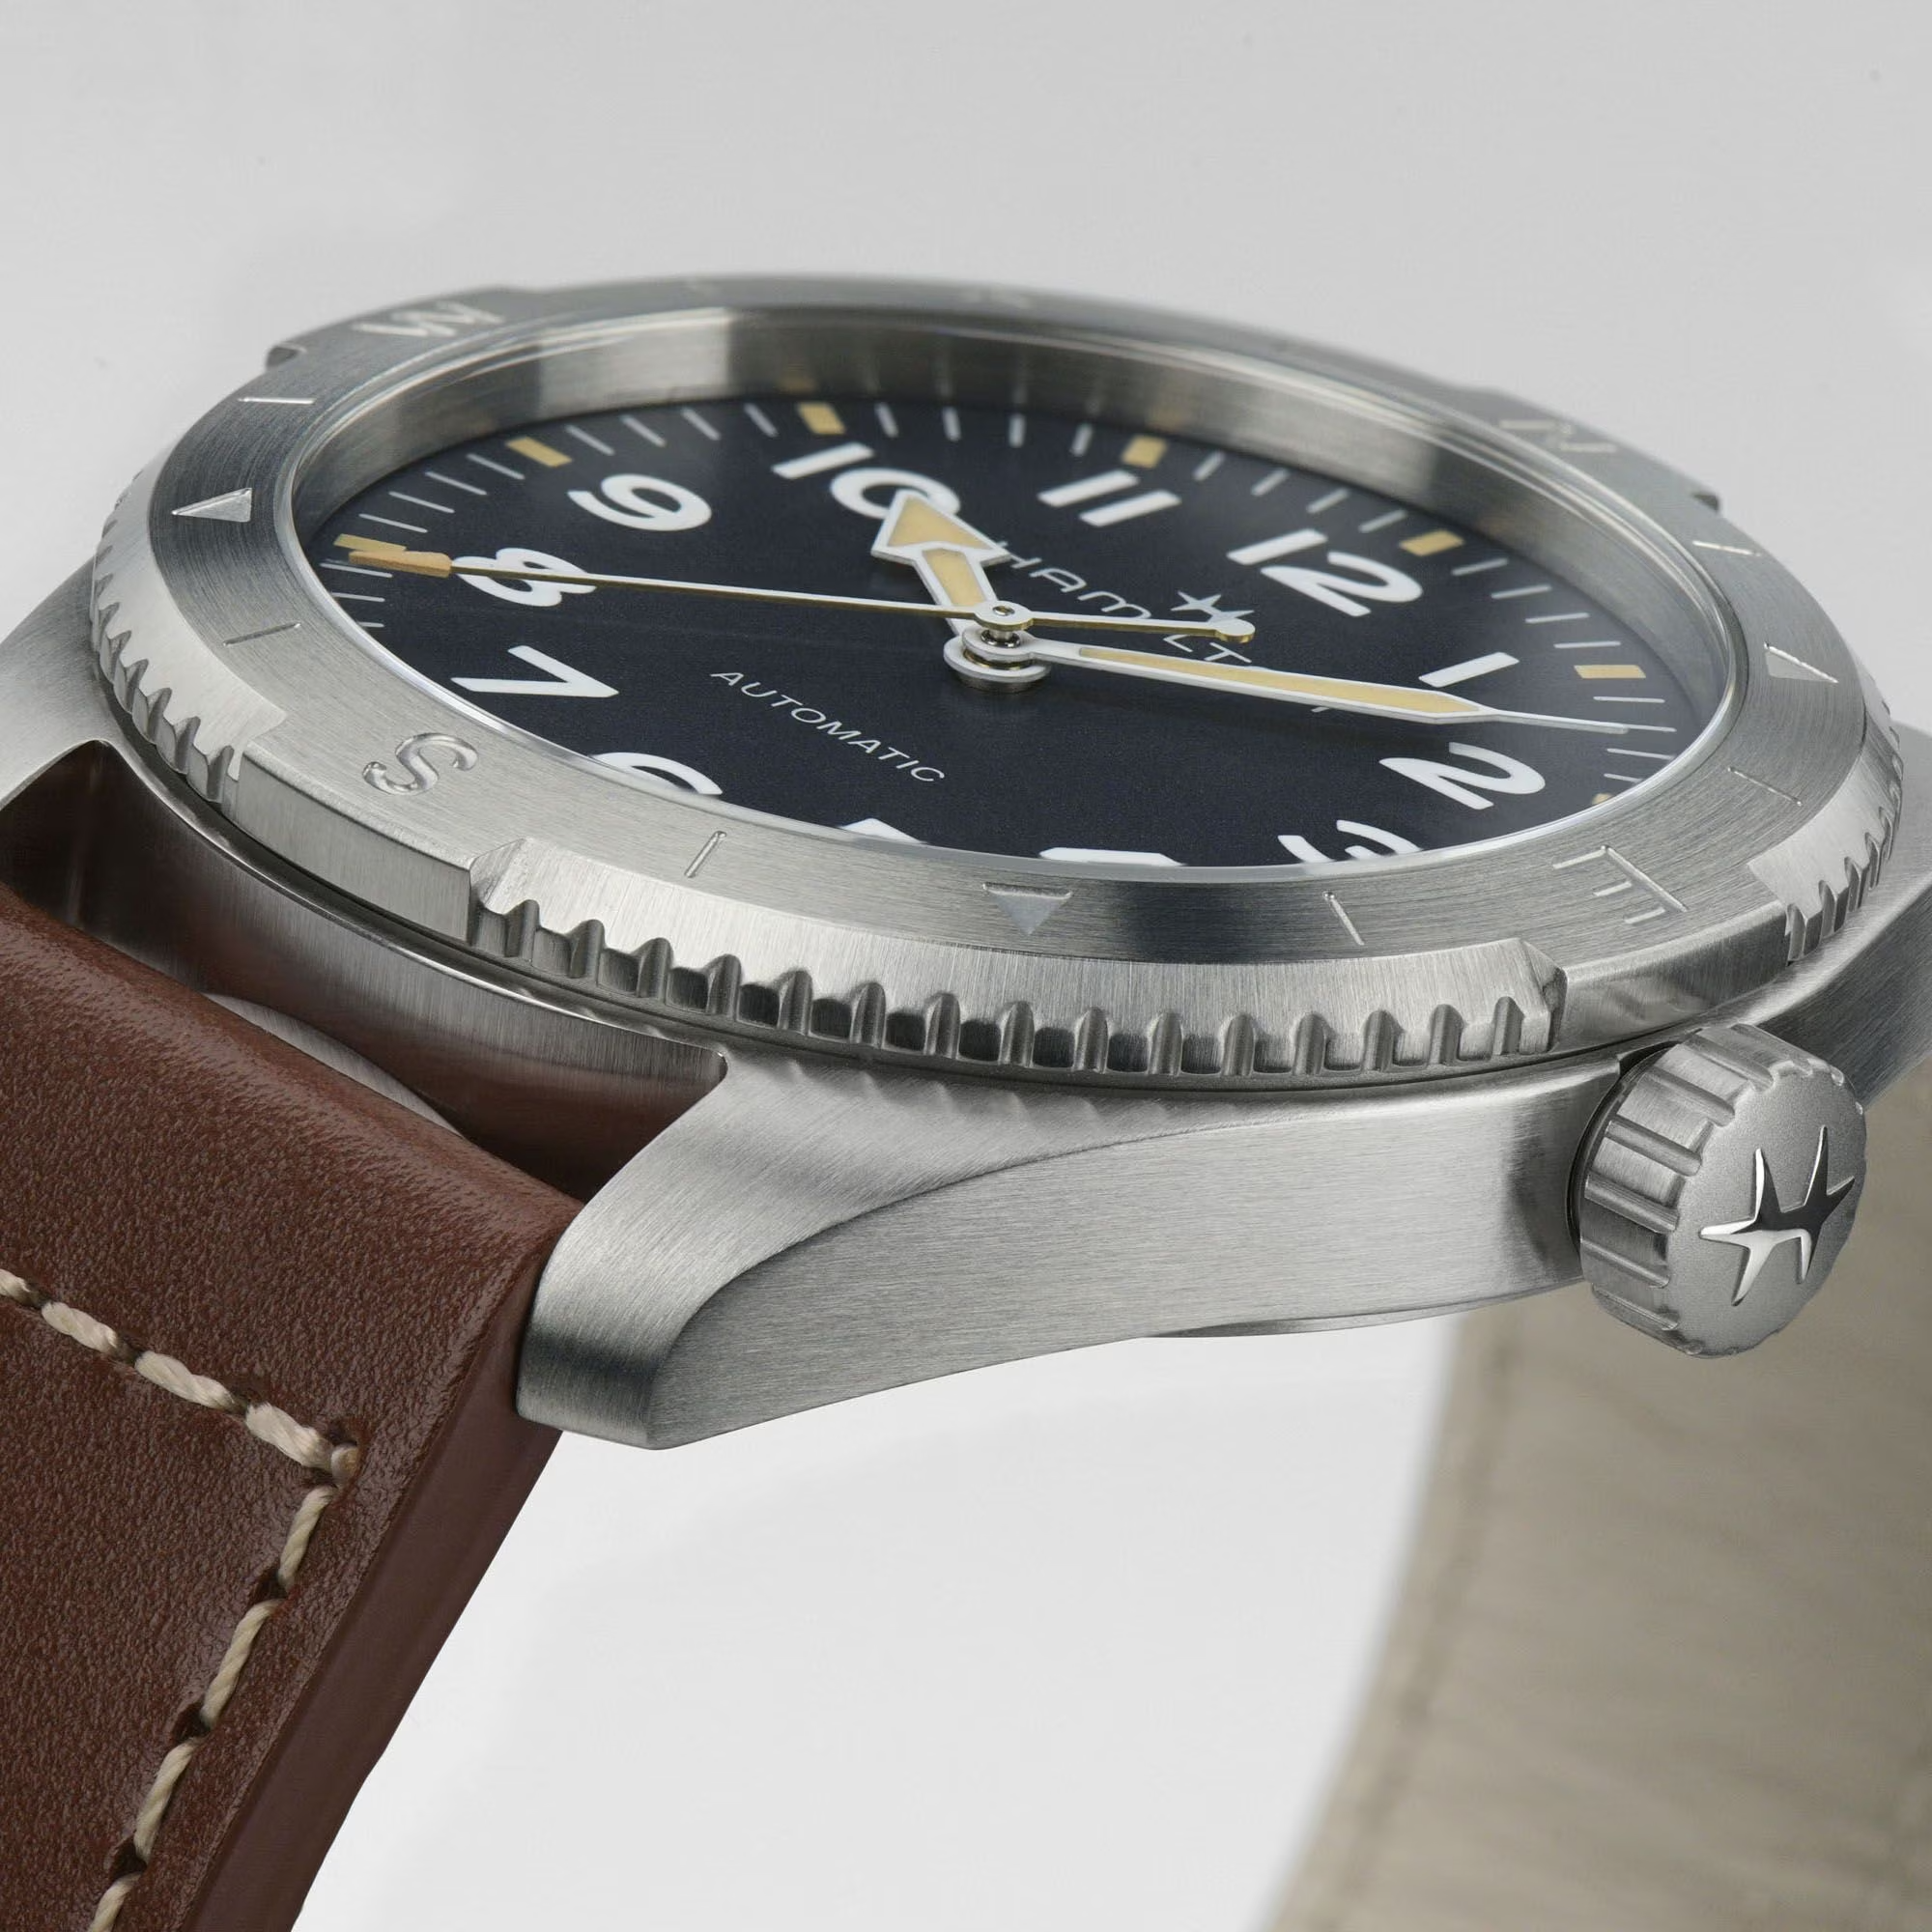 Khaki Field Expedition 41mm Automatic Strap Watch